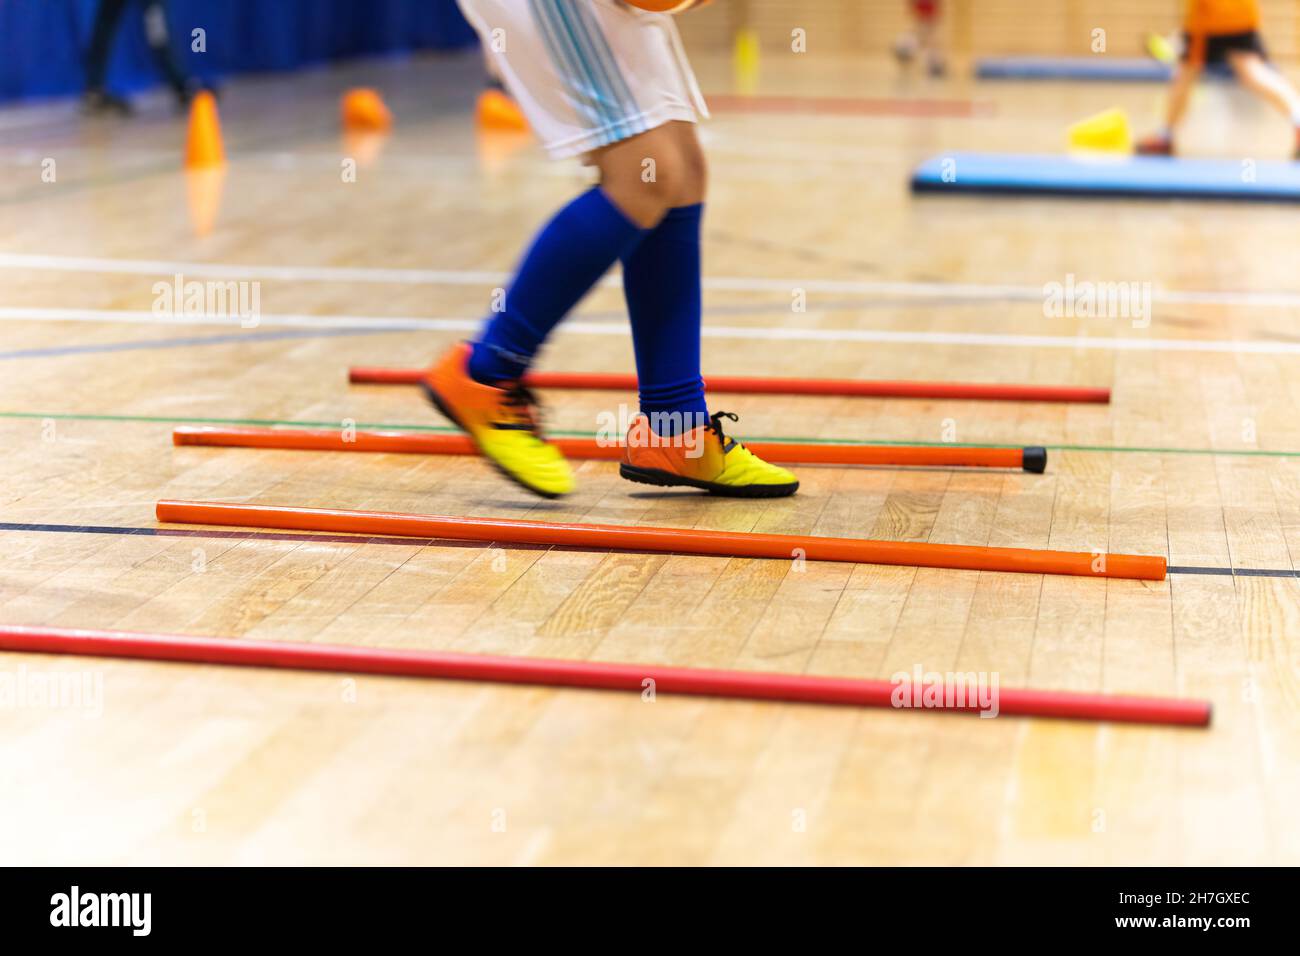 Happy Child Playing on Physical Education Indoor Class. Legs of Kid Boy Running on Training Drill in Sportswear. Practice Trail During Physical Educat Stock Photo